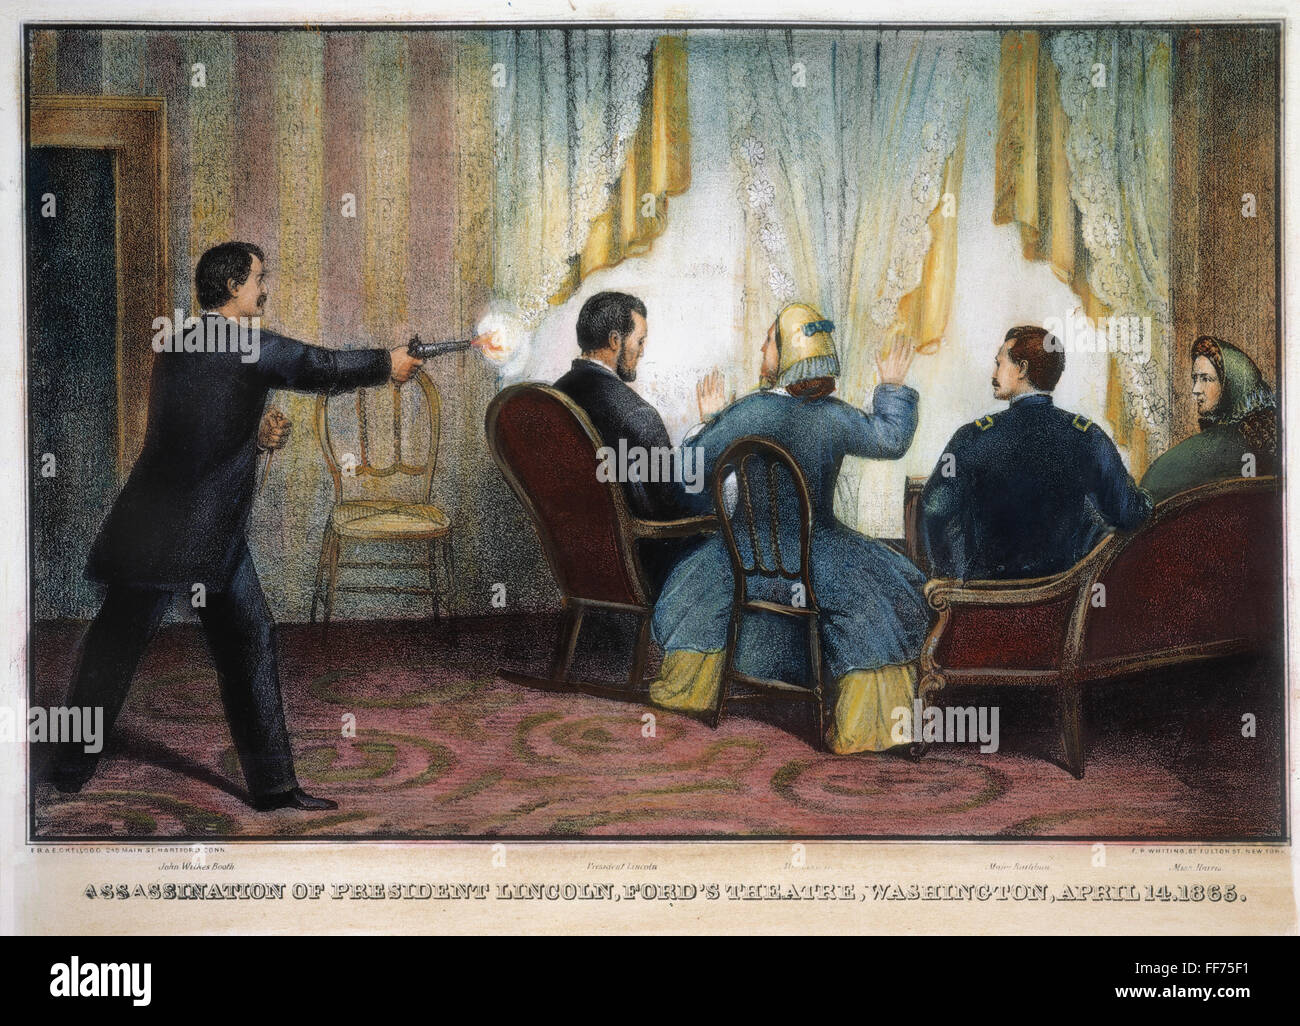 LINCOLN ASSASSINATION. /nThe assassination of President Abraham Lincoln by John Wilkes Booth at Ford's Theatre, Washington, D.C., 14 April 1865. Contemporary lithograph. Stock Photo